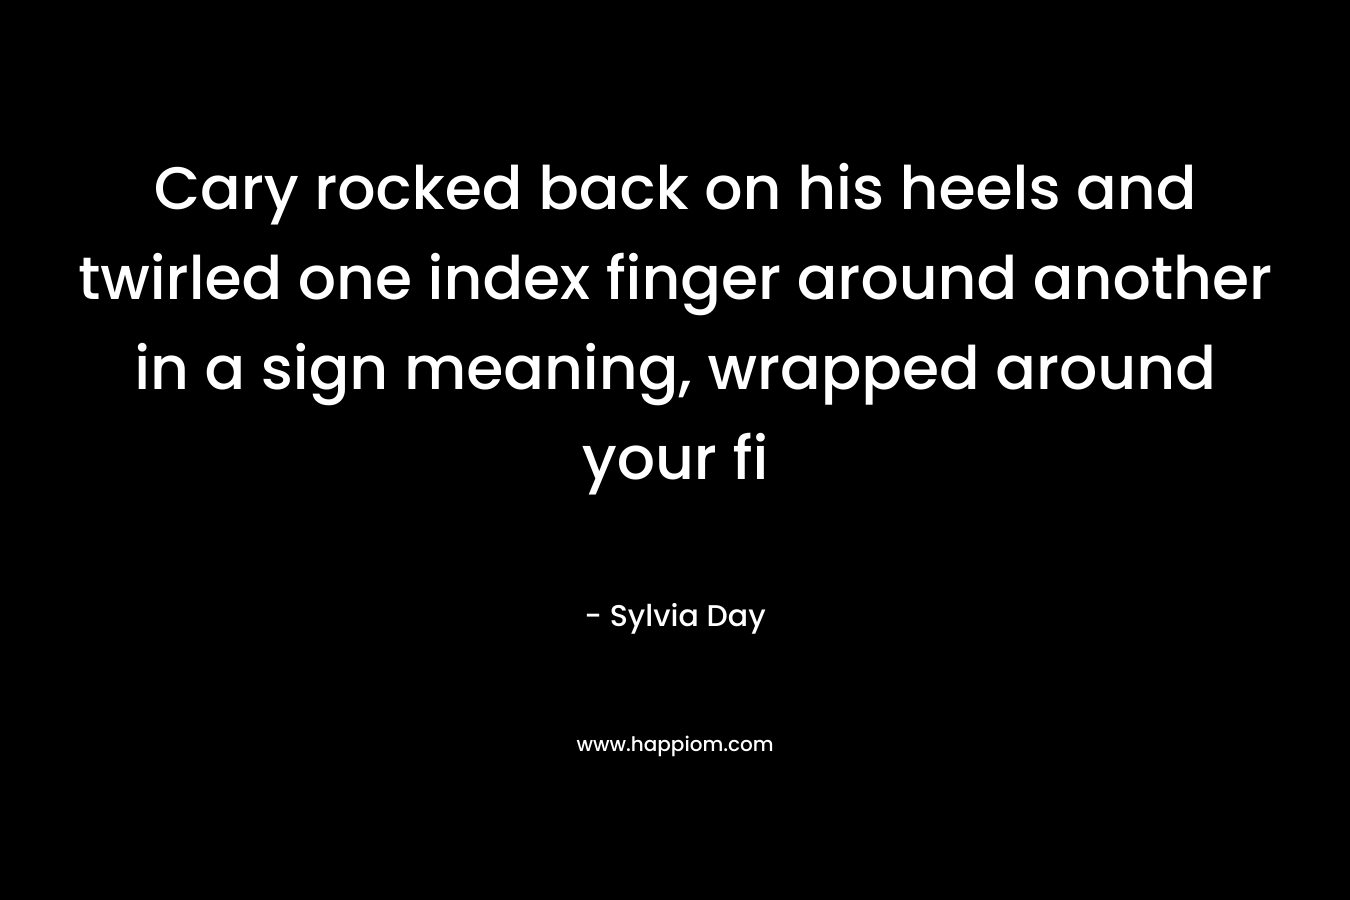 Cary rocked back on his heels and twirled one index finger around another in a sign meaning, wrapped around your fi